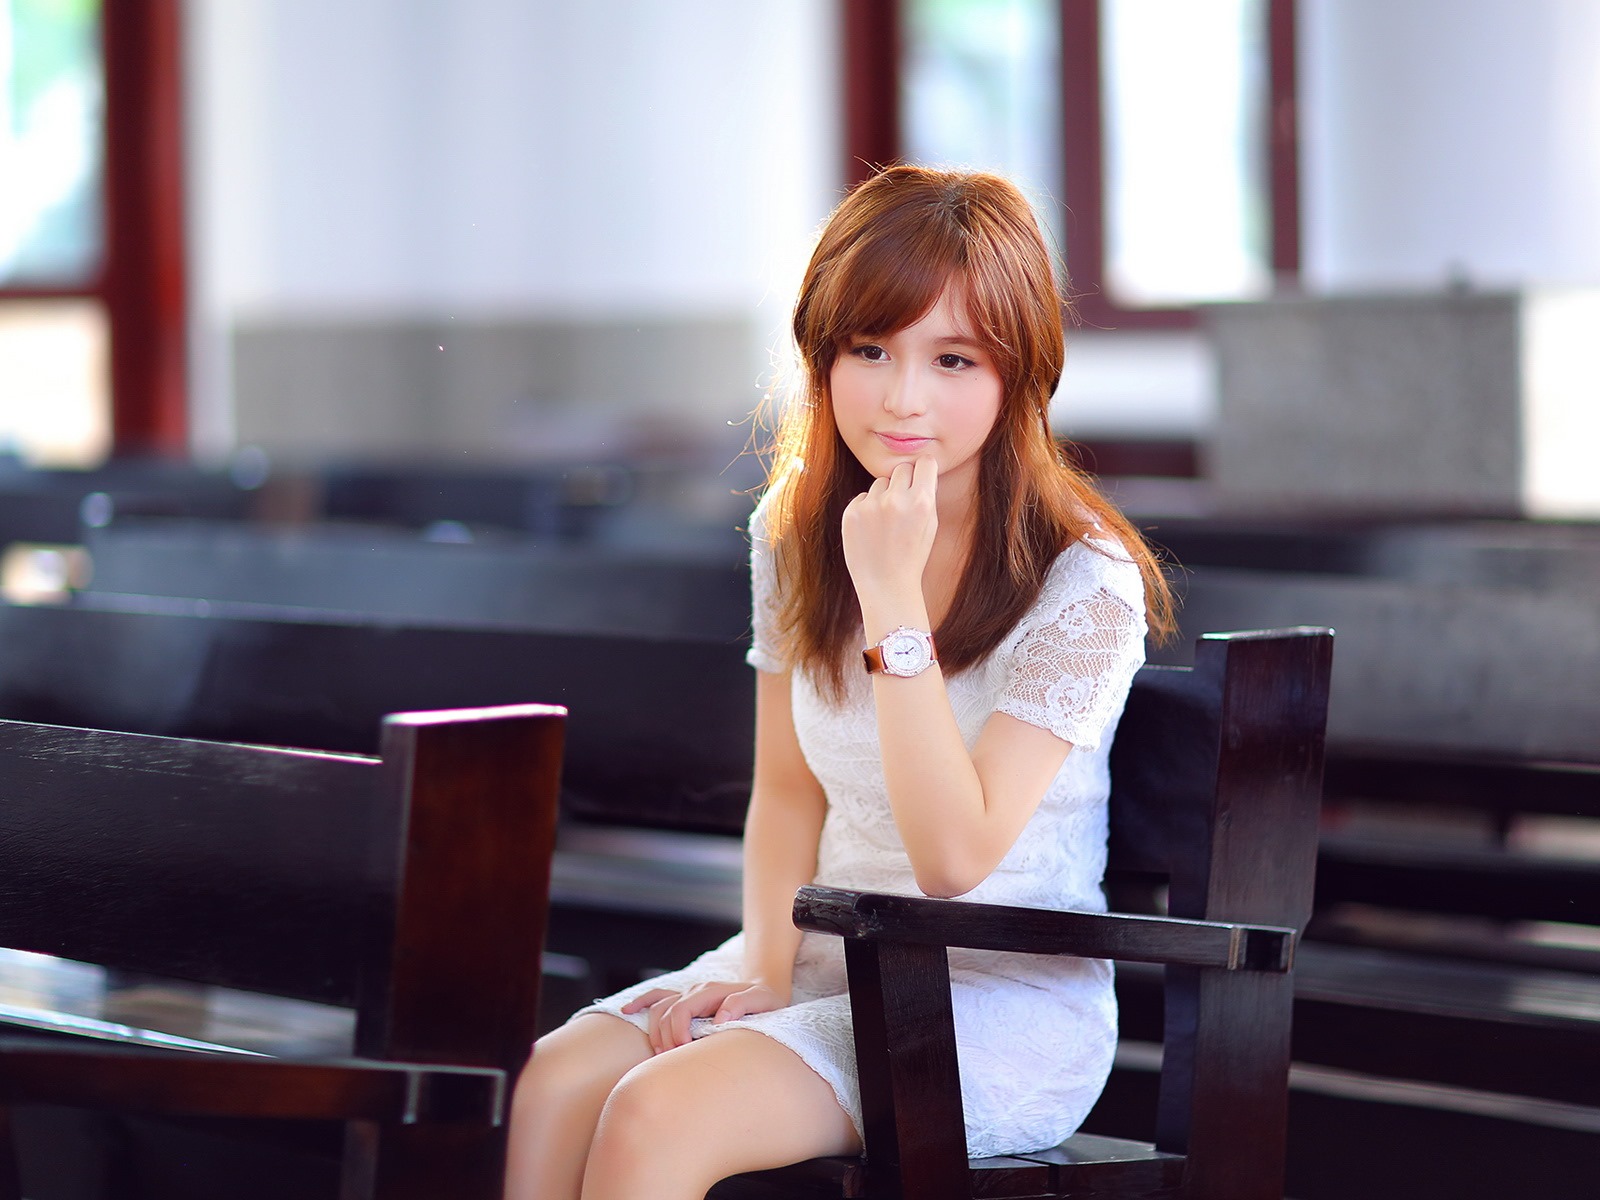 Pure and lovely young Asian girl HD wallpapers collection (2) #37 - 1600x1200